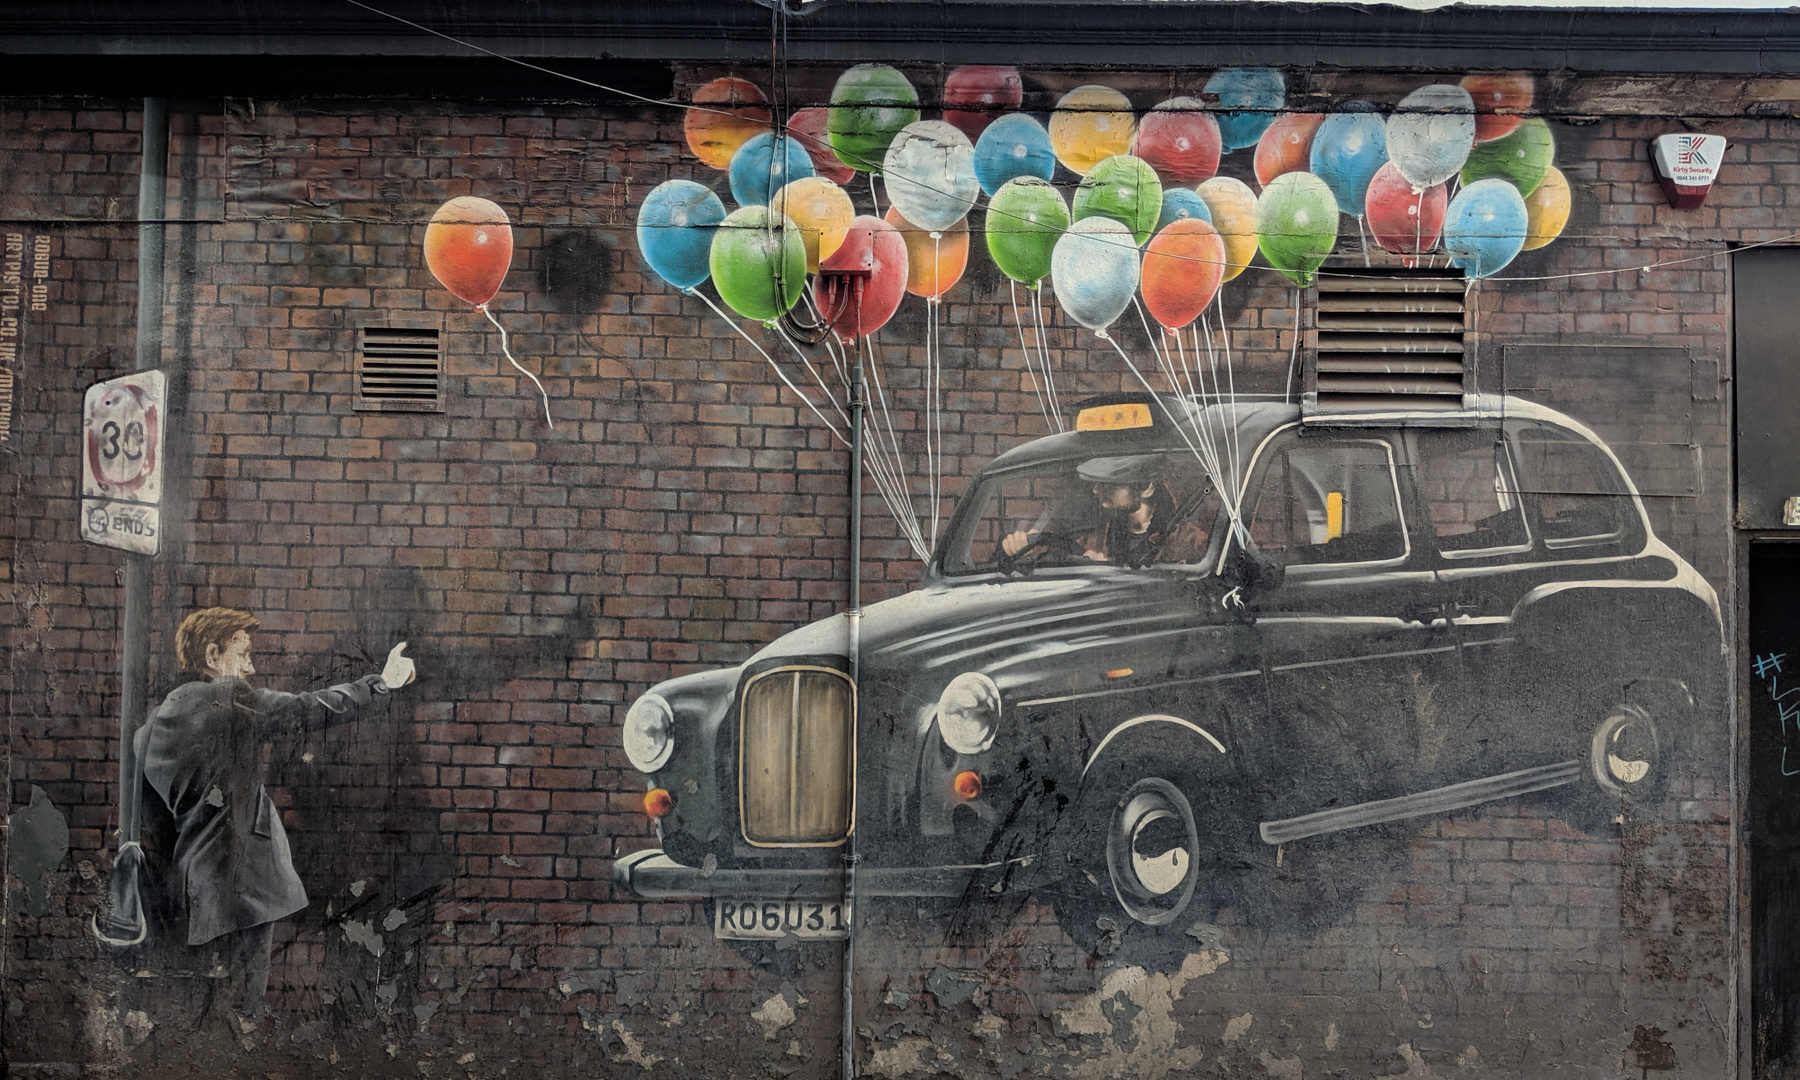 Top Things to do in Glasgow, Scotland: The World's Most Economical Taxi Mural (Street Art)